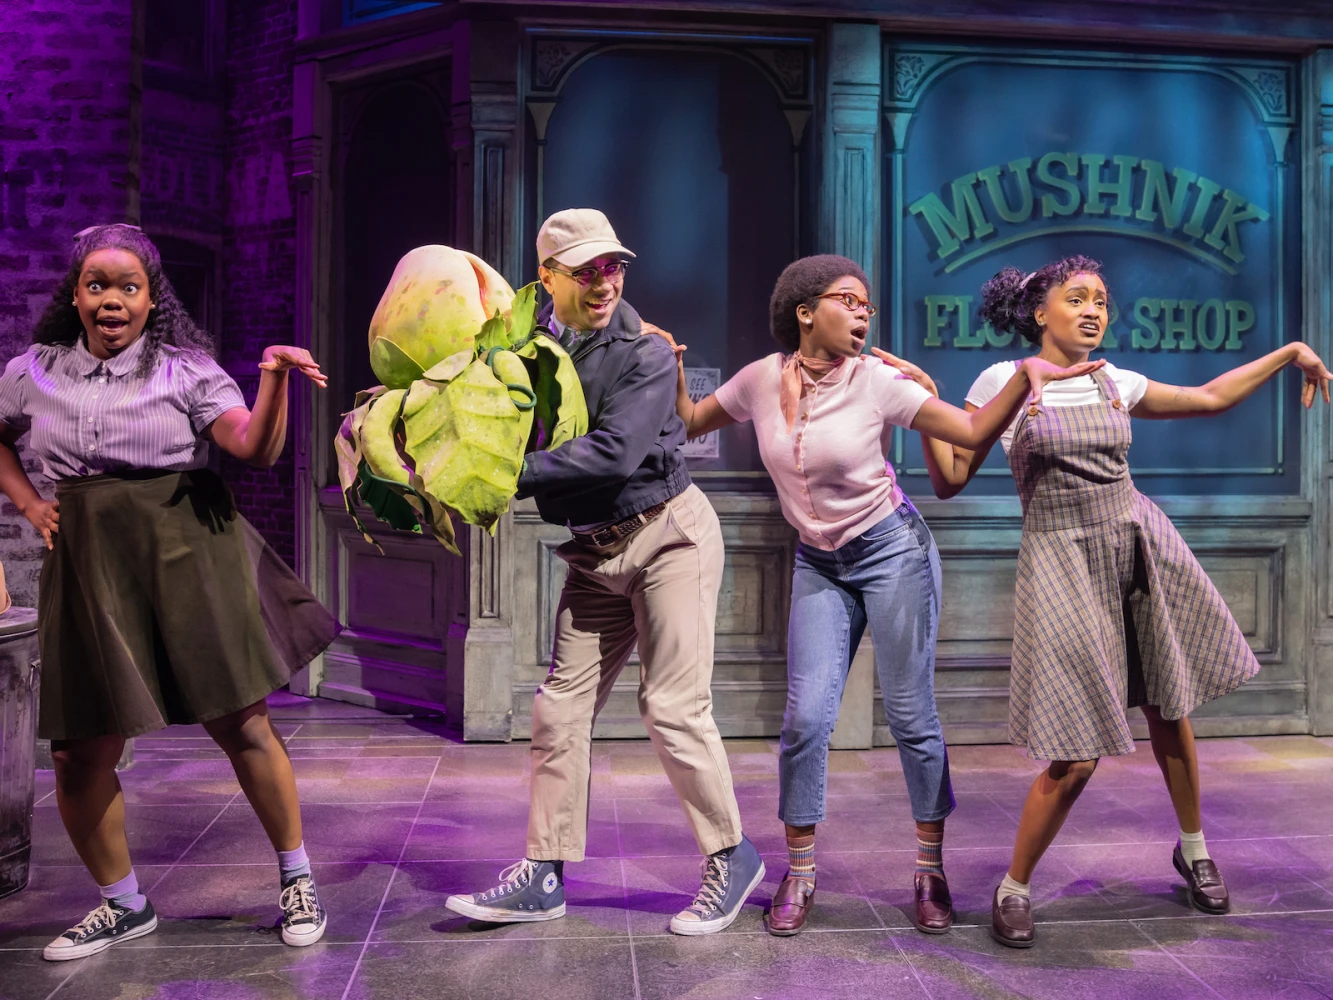 Little Shop of Horrors: What to expect - 10